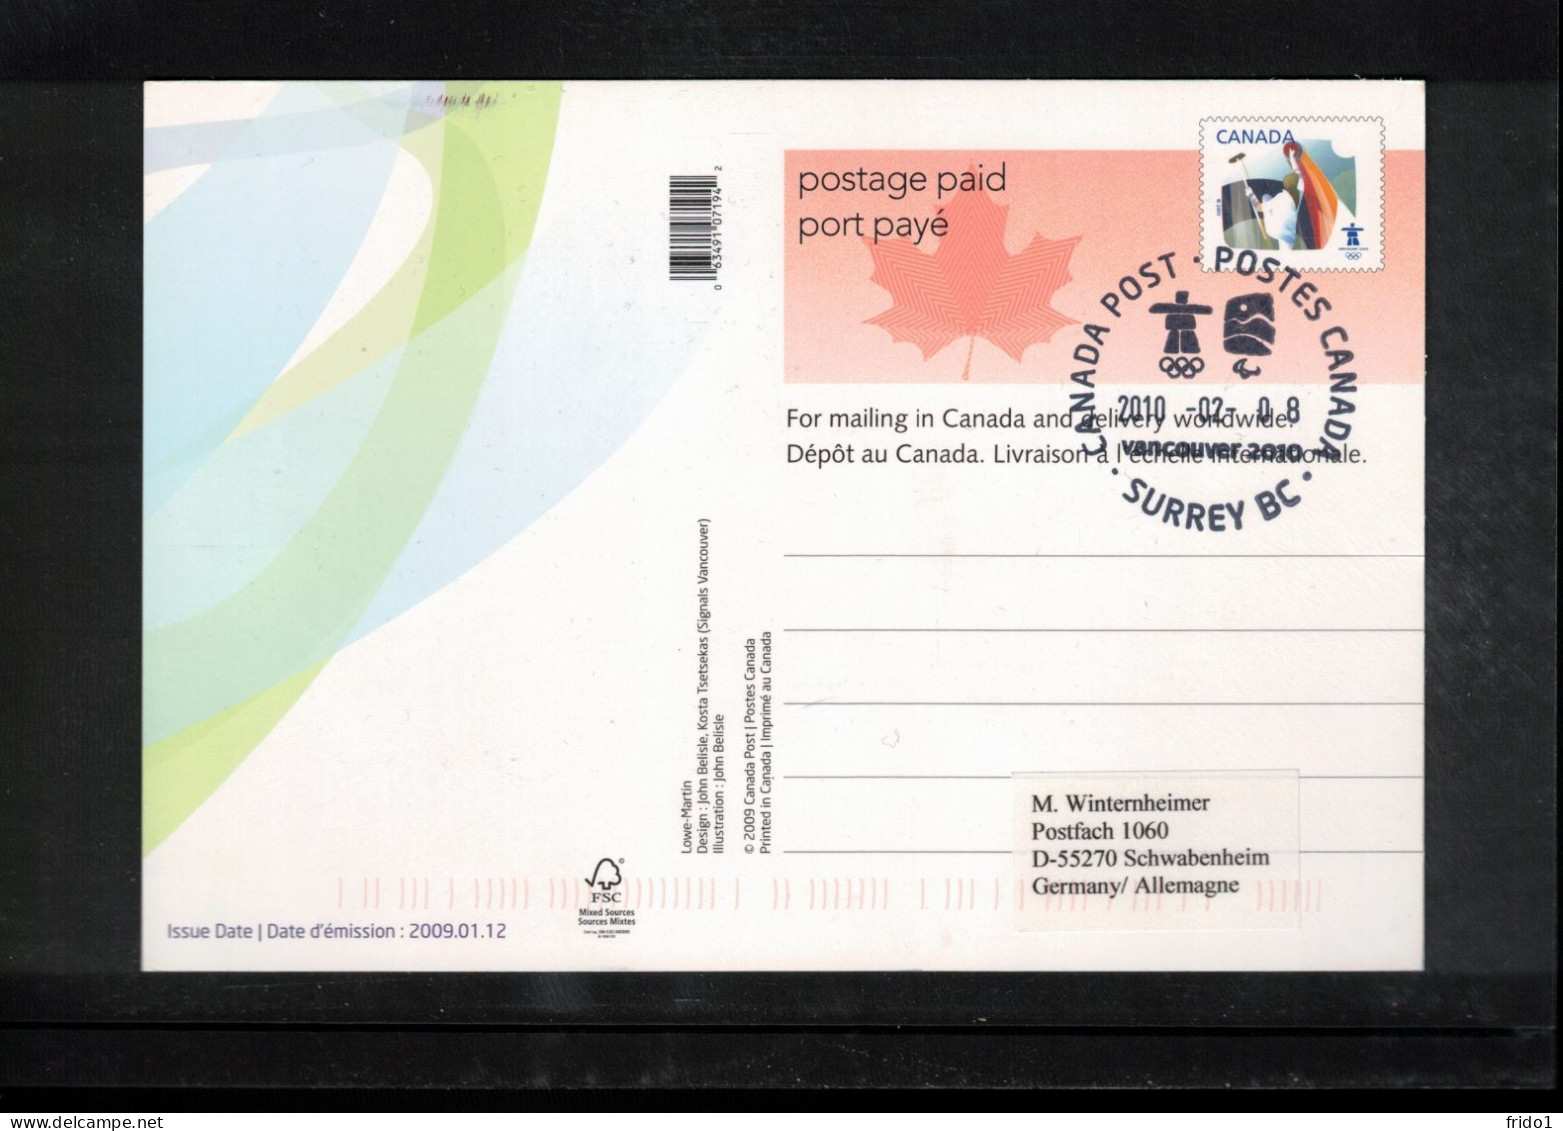 Canada 2010 Olympic Games Vancouver - SURREY BC Postmark Interesting Postcard - Winter 2010: Vancouver